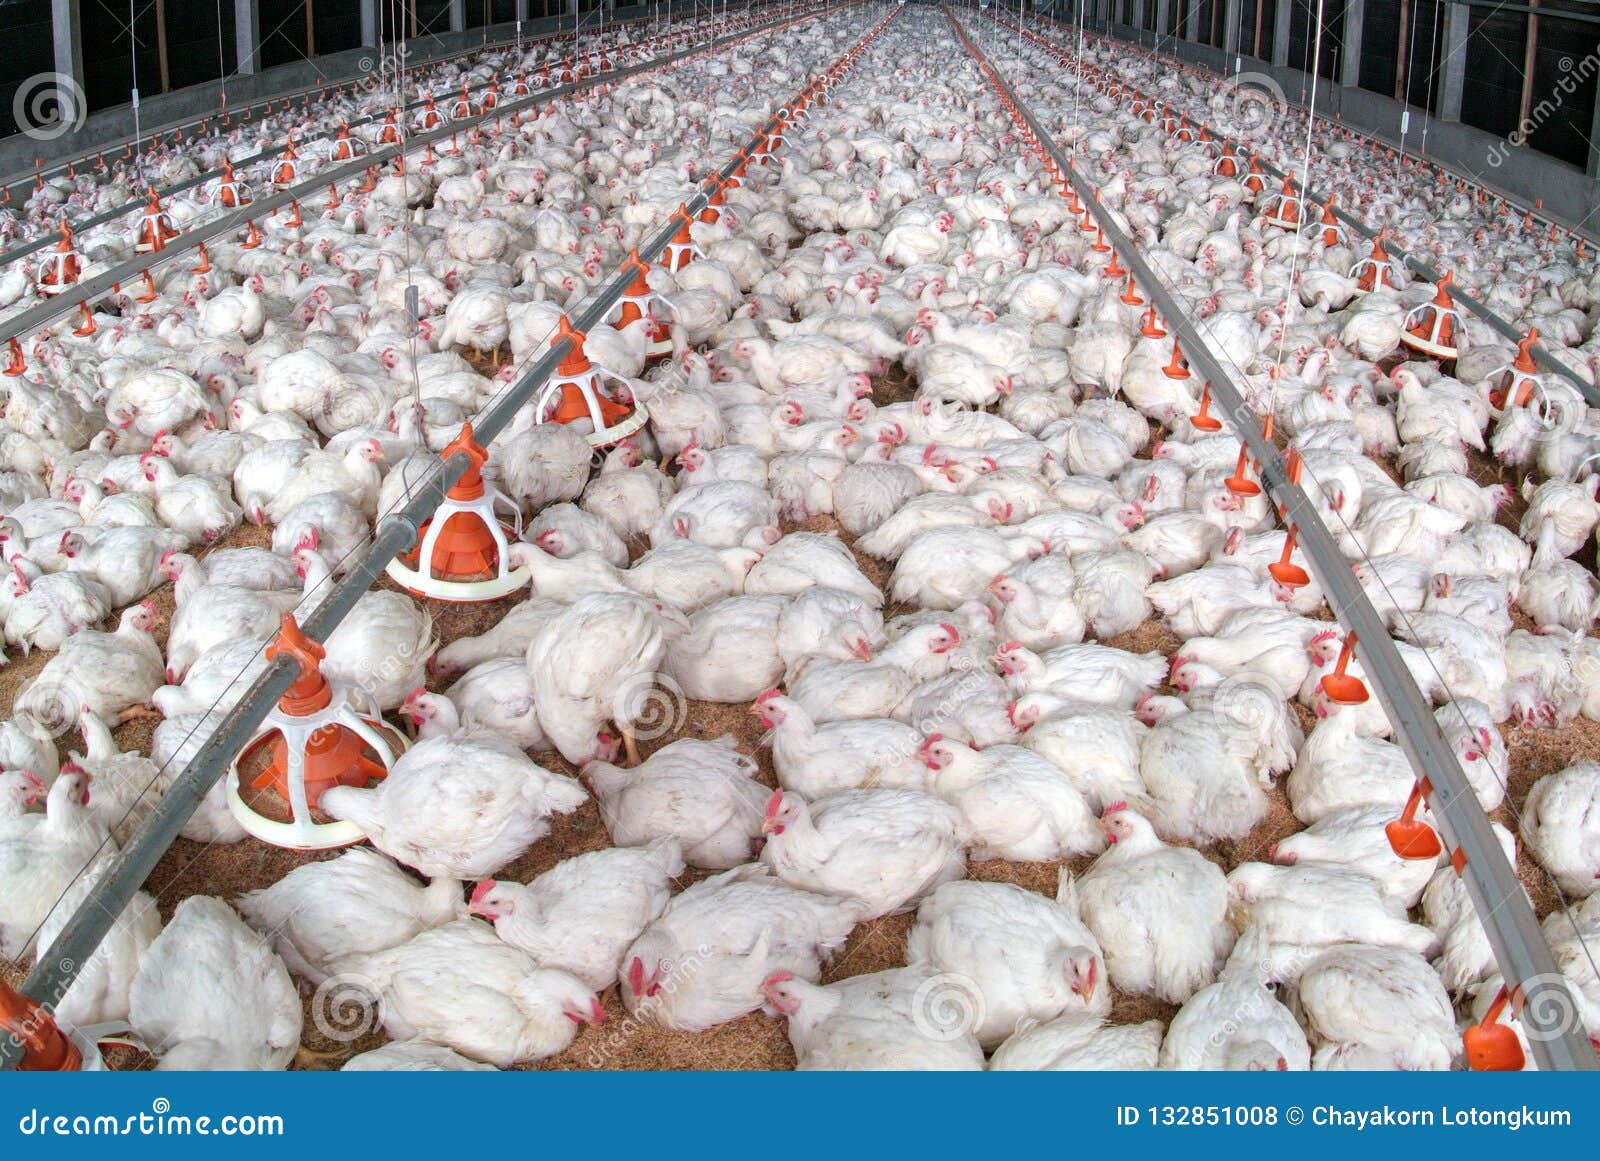 poultry broiler in housing farm business